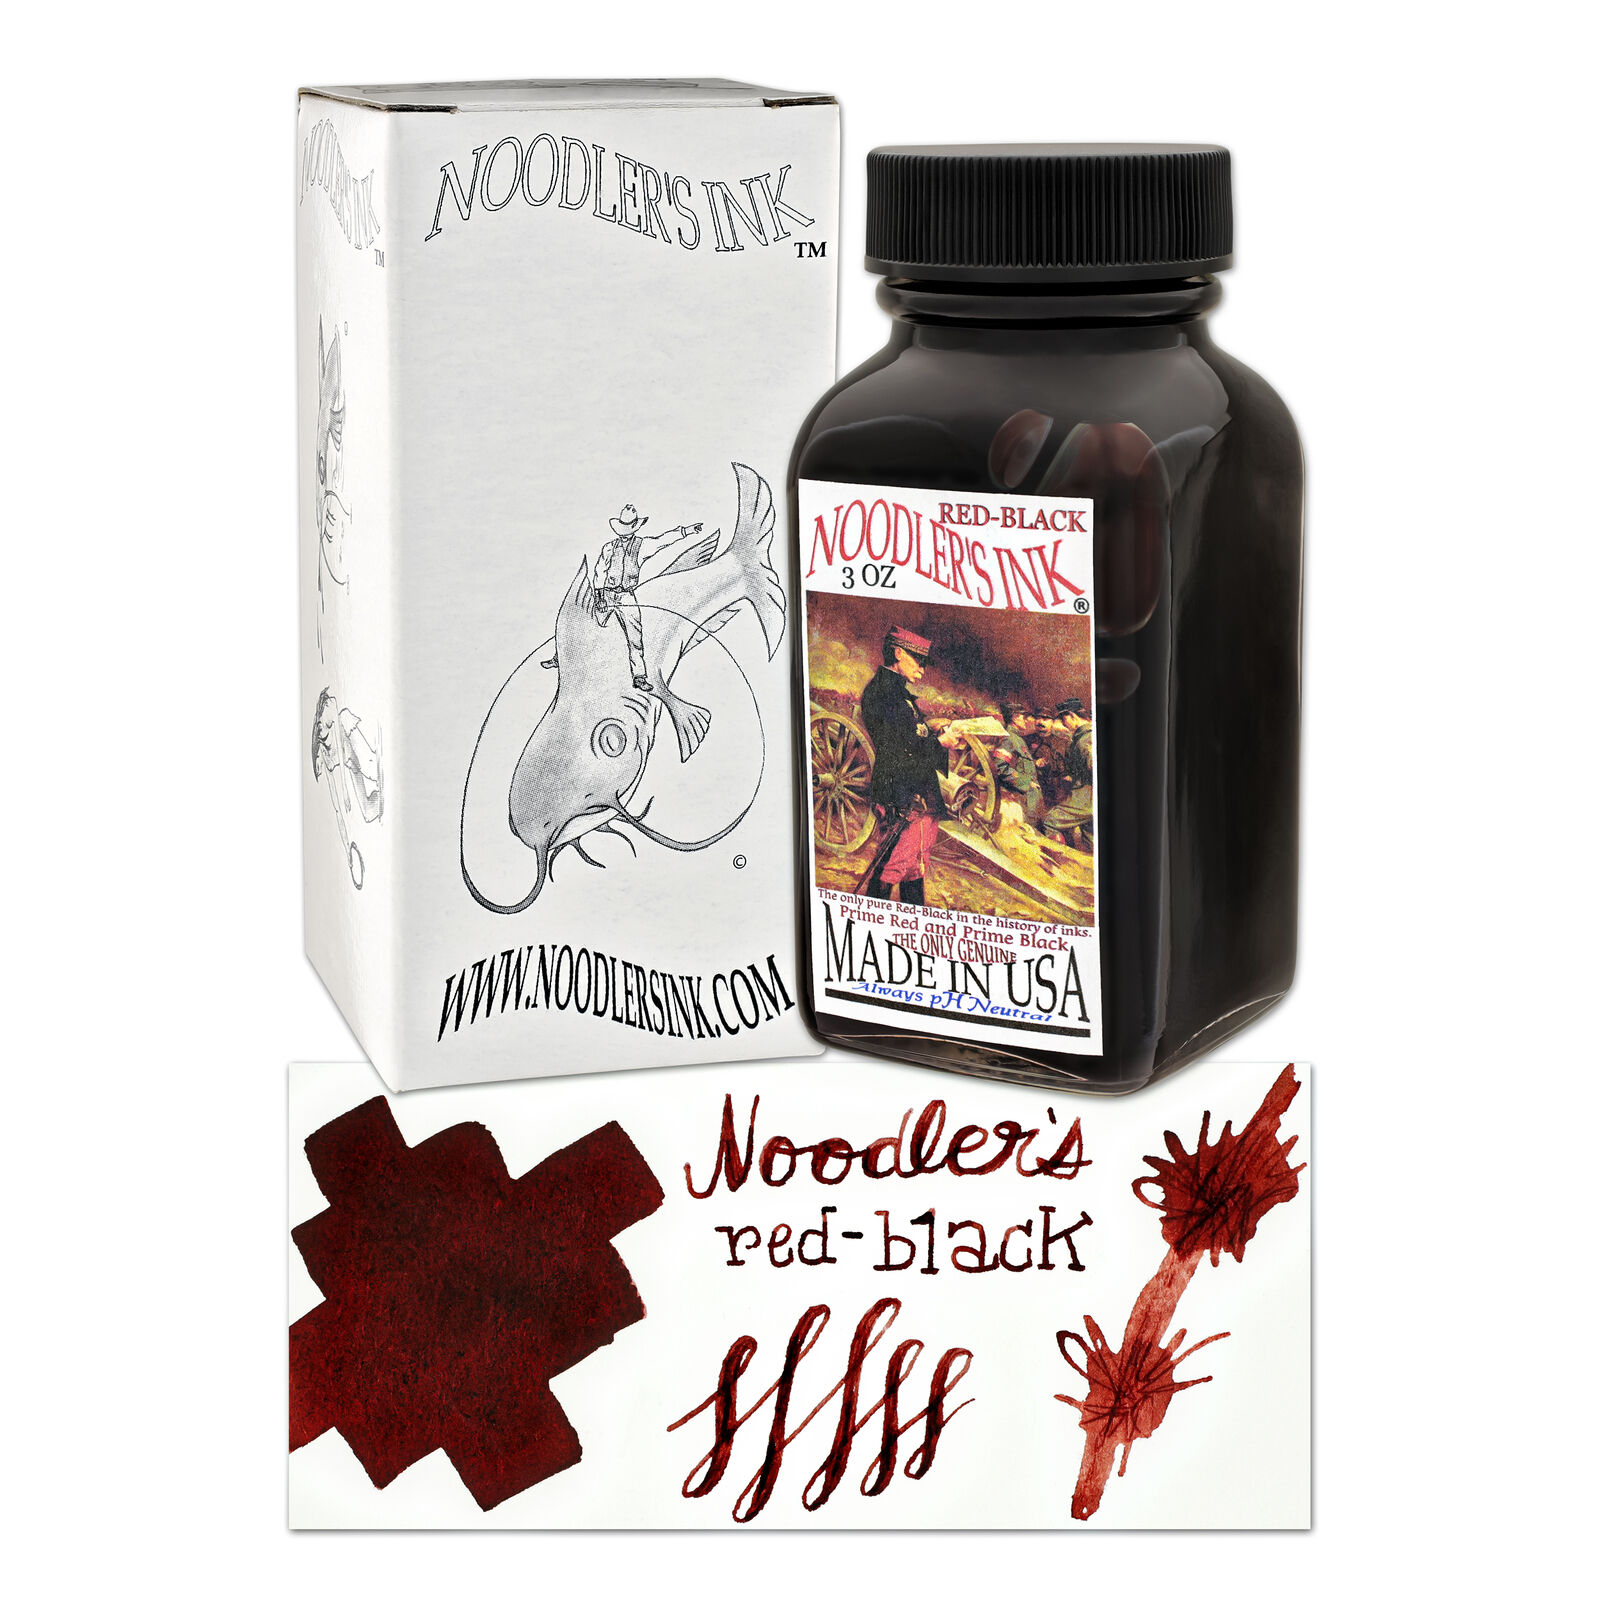 Noodler's Bottled Ink for Fountain Pens in Red-Black - 3oz - New In Box - 19019